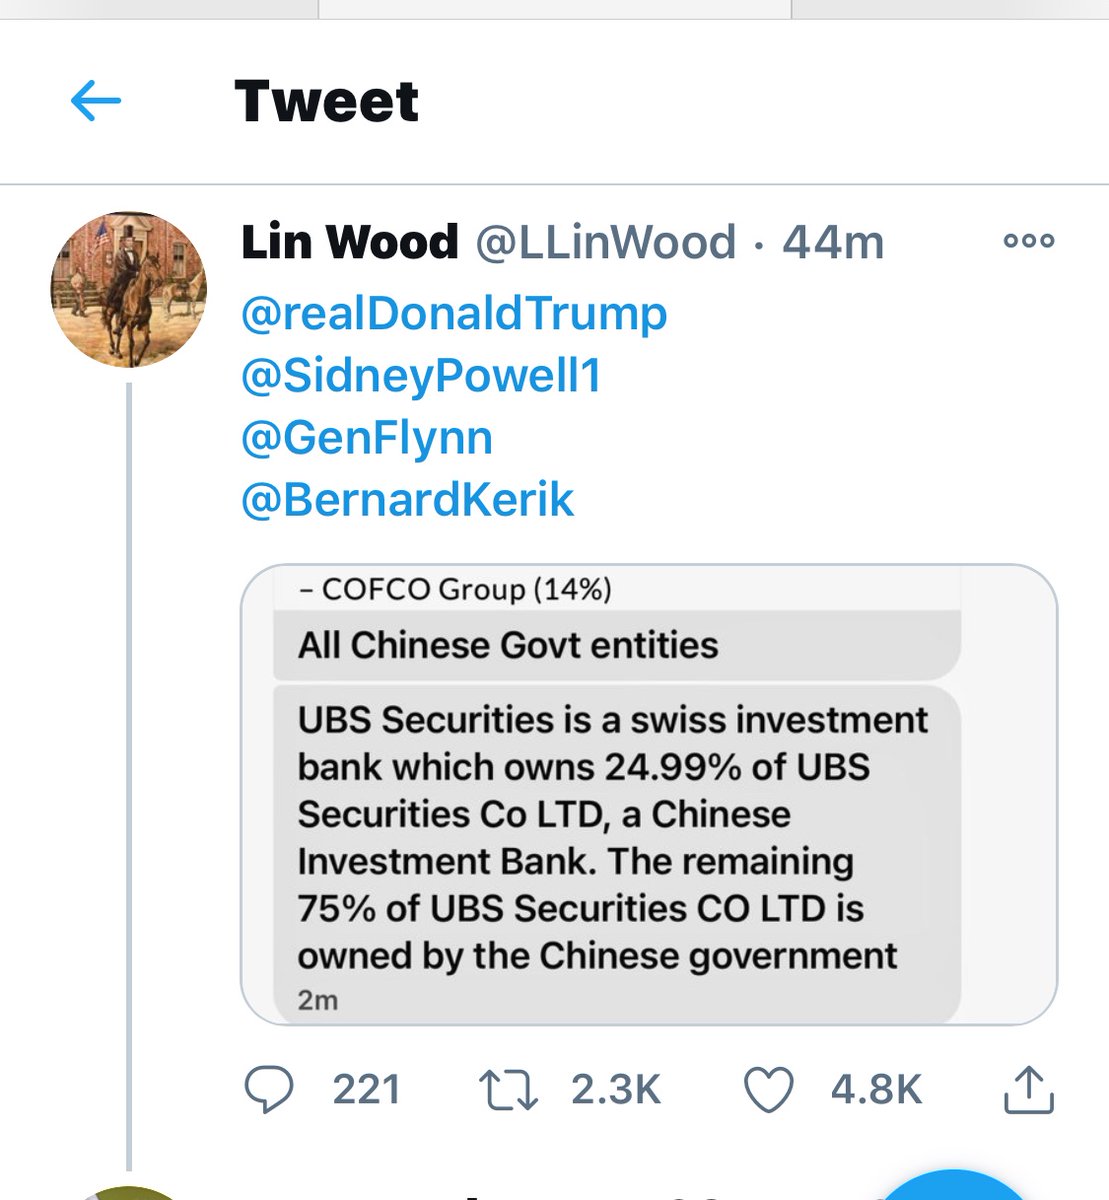 Well isn’t this strange, S0R0S bought stock in the company Palantir 1 week prior to Oct 8th. And 2 weeks after the election, he sold it. UBS bought Palantir stock also.This company deals with CIA IN-Q-TEL  @LLinWood  https://thefly.com/landingPageNews.php?id=3196536&headline=PLTR;MCHP;U;VAR;TDG;GRFS;BK;BAC;JPM;DHI;DRI;ARMK;GM;ATVI;PCG;TMUS;NLOK;PTON;C;LBRDK-Soros-takes-stake-in-Palantir-exits-TransDigm-position  https://twitter.com/LLinWood/status/1333815984390610945